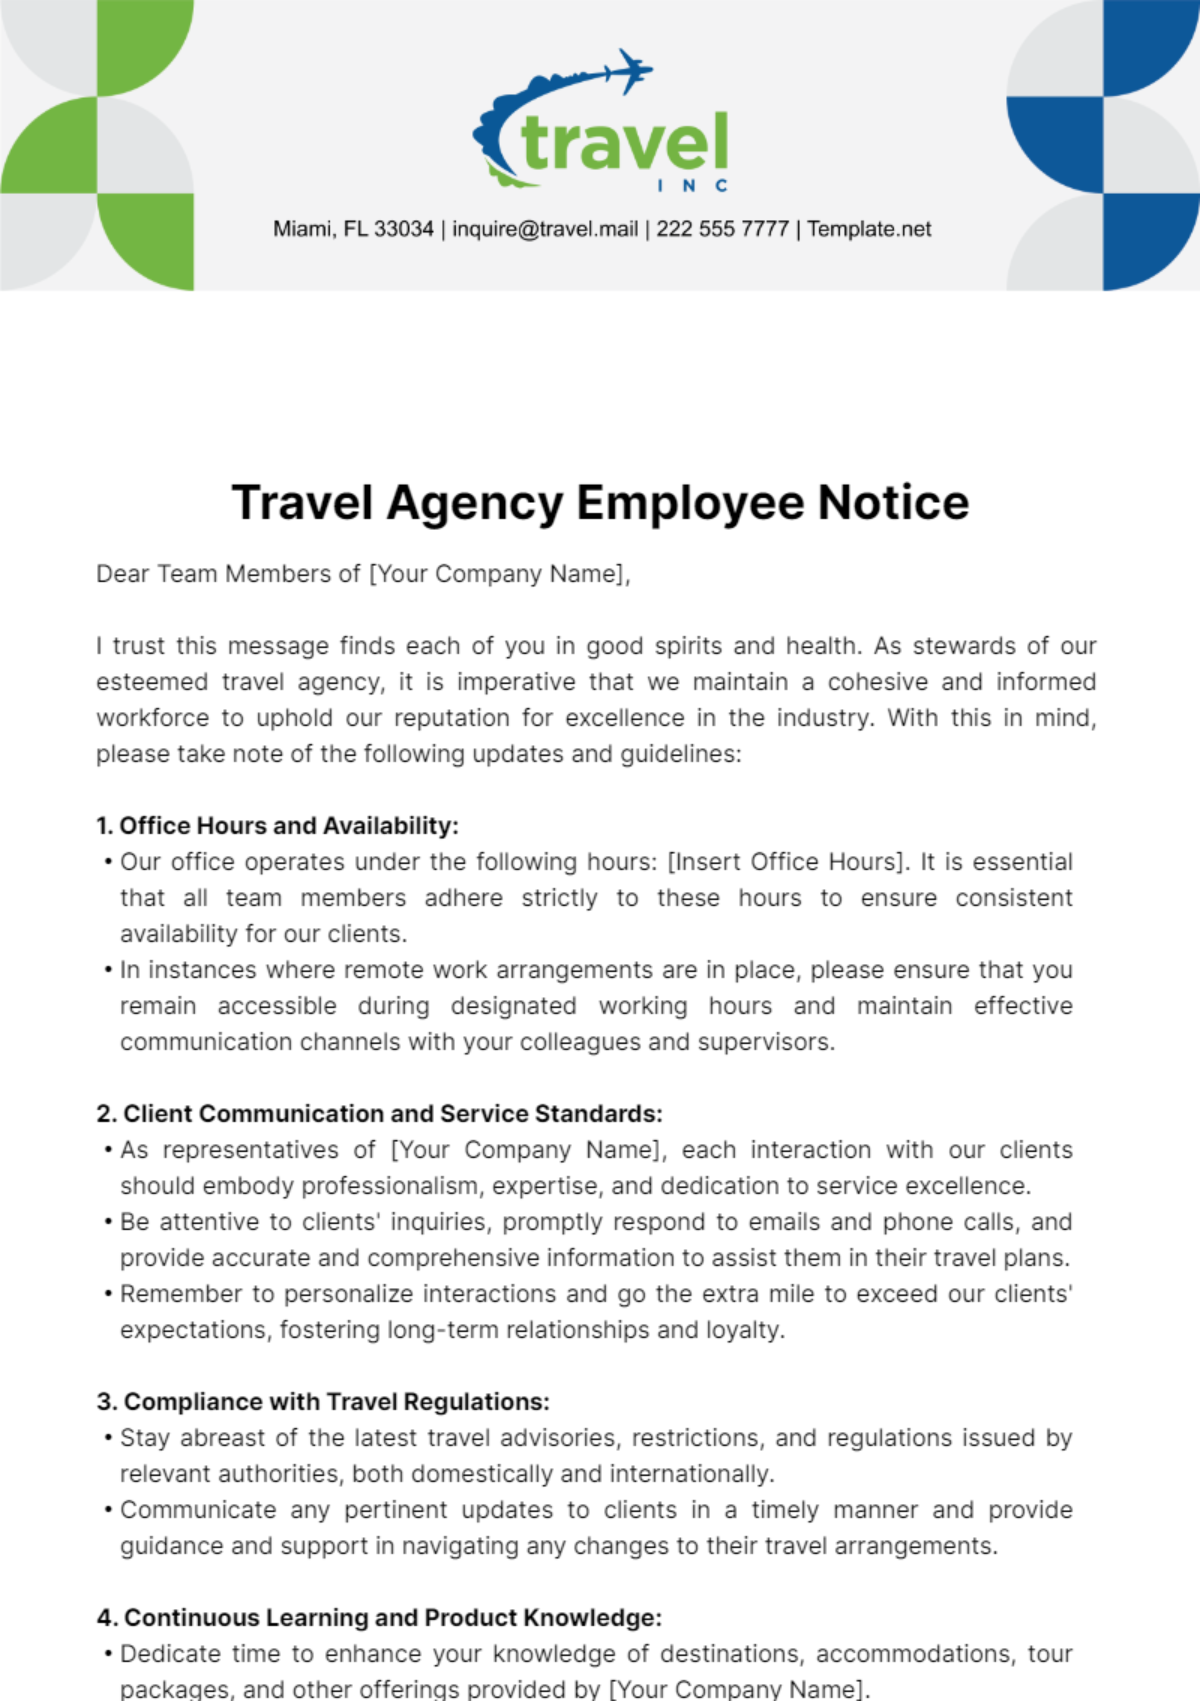 Free Travel Agency Employee Notice Template